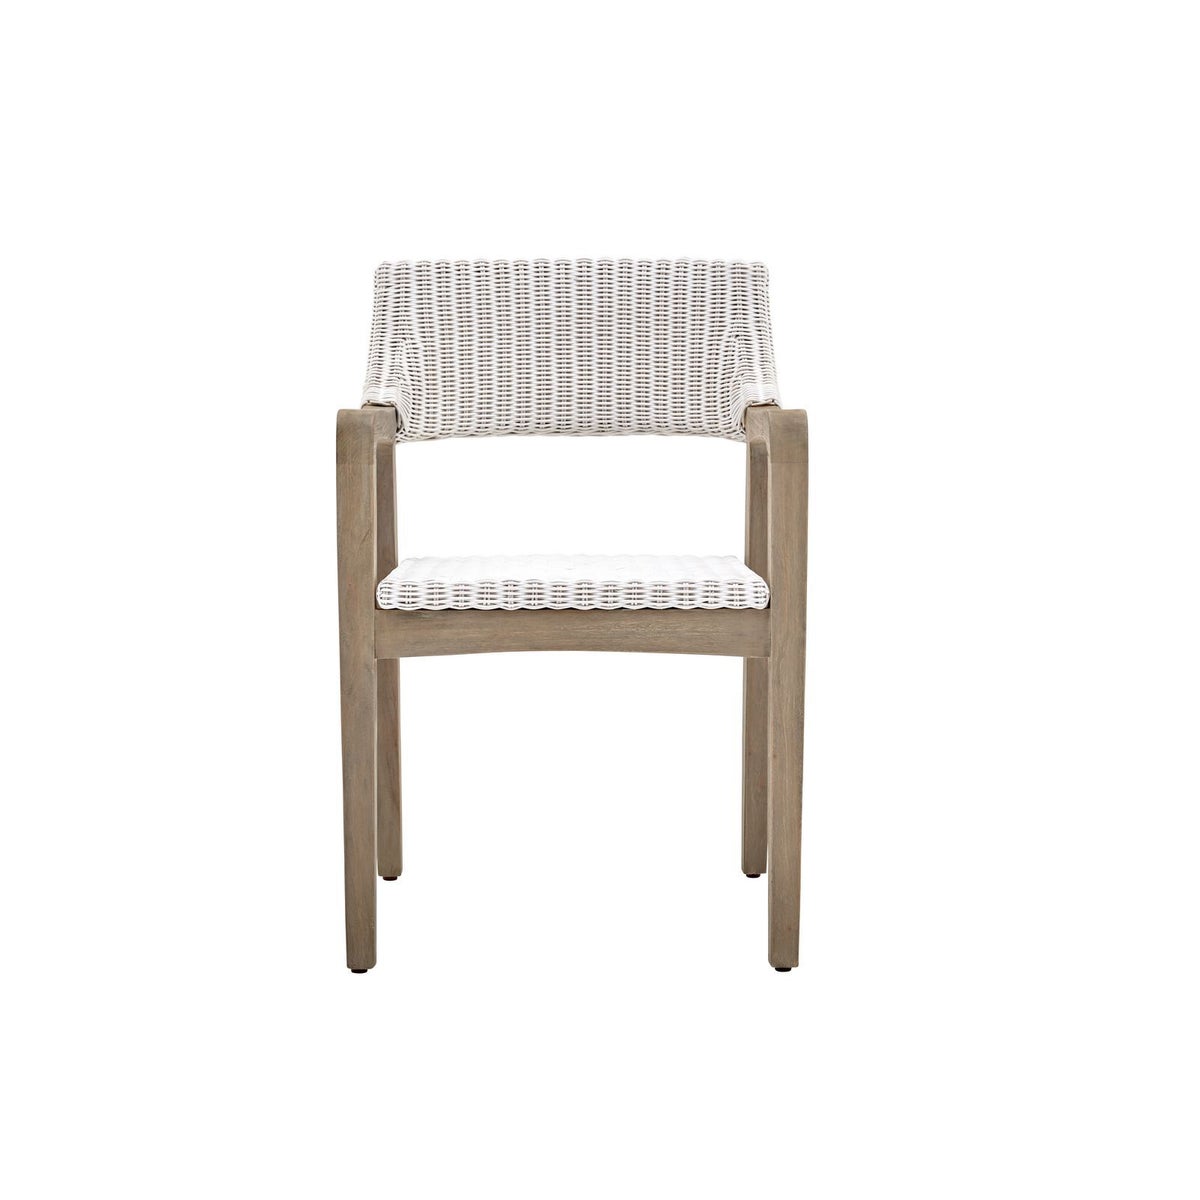 Urbane Arm Chair Frame Color - Old Gray Woven Seat & Back Color - White